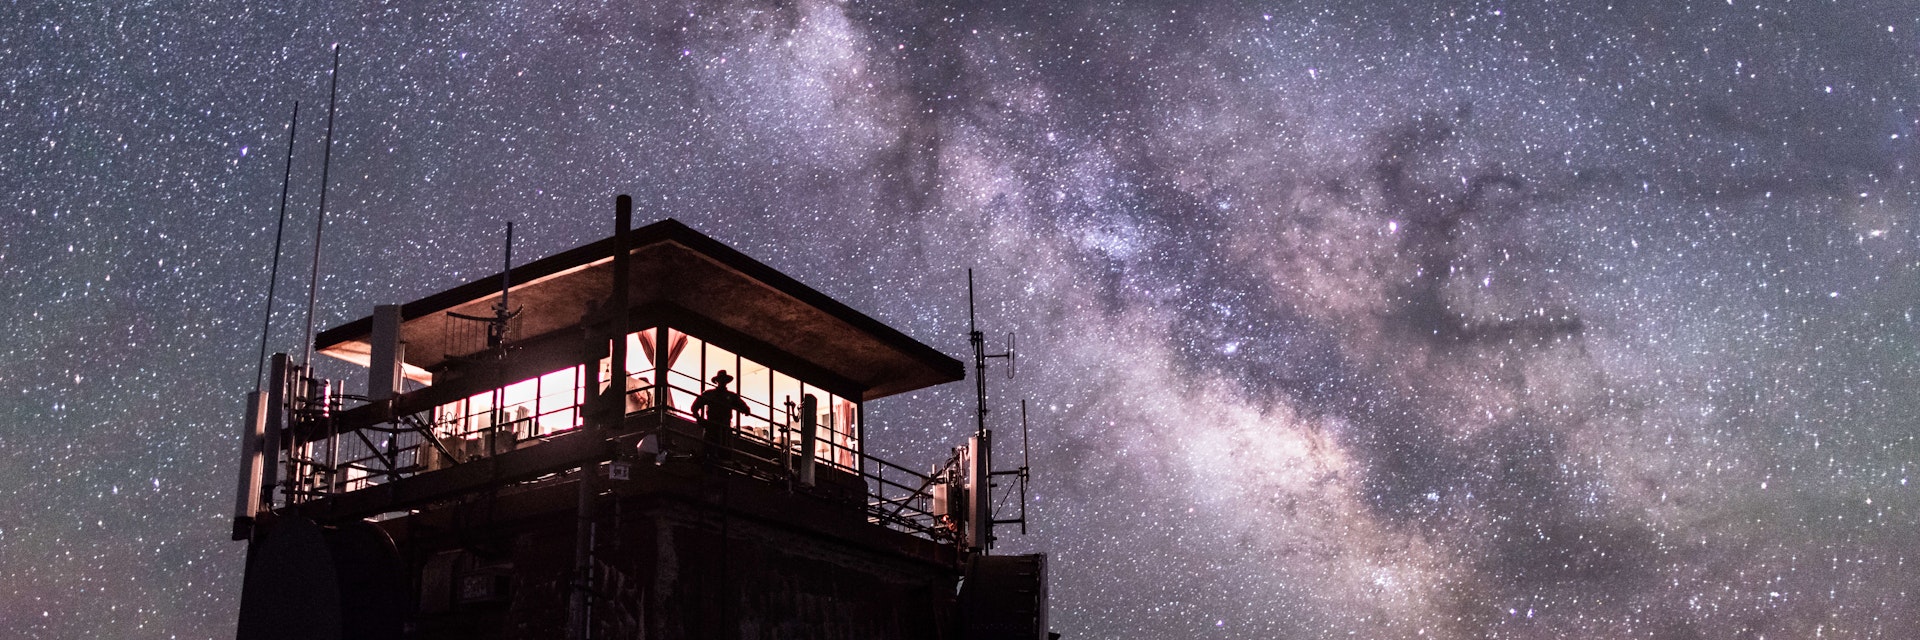 Washburn Fire Lookout under the Milky Way Yellowstone National Park.